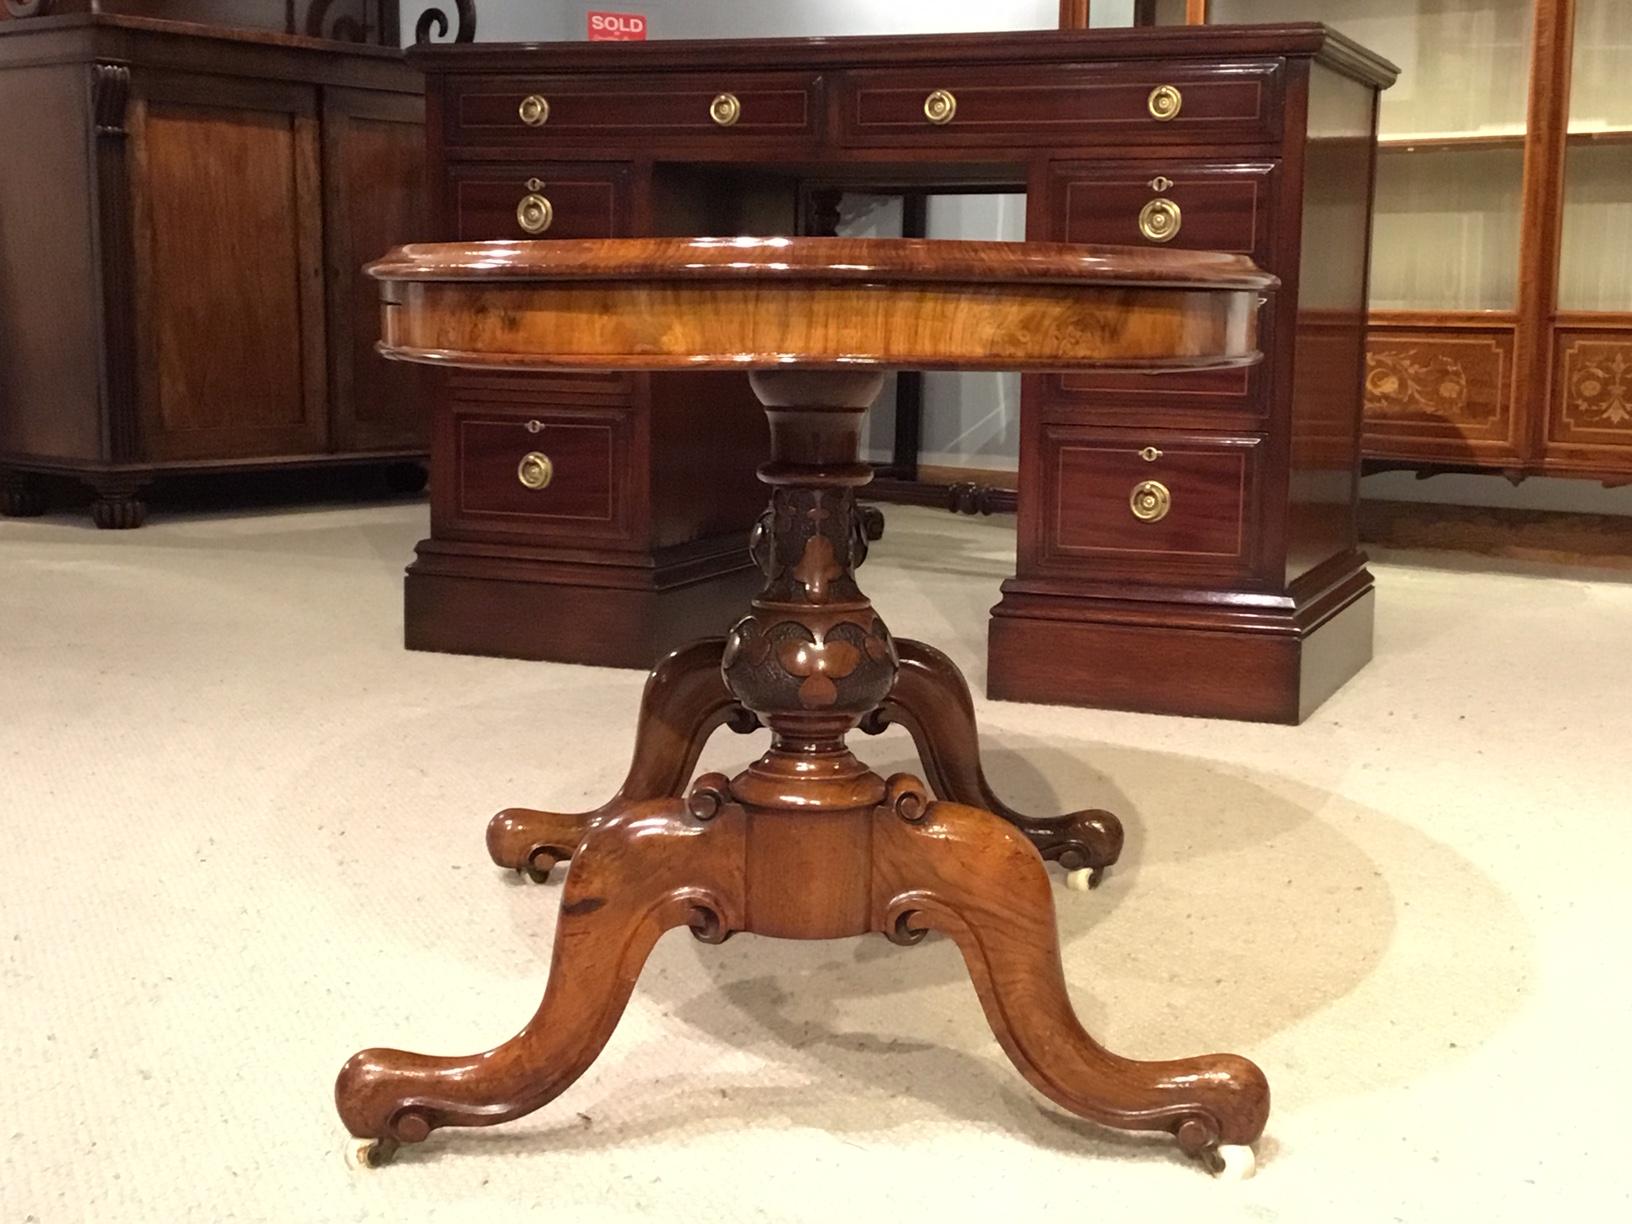 Unusual Burr Walnut and Walnut Victorian Period Oval Coffee Table with Slide 5